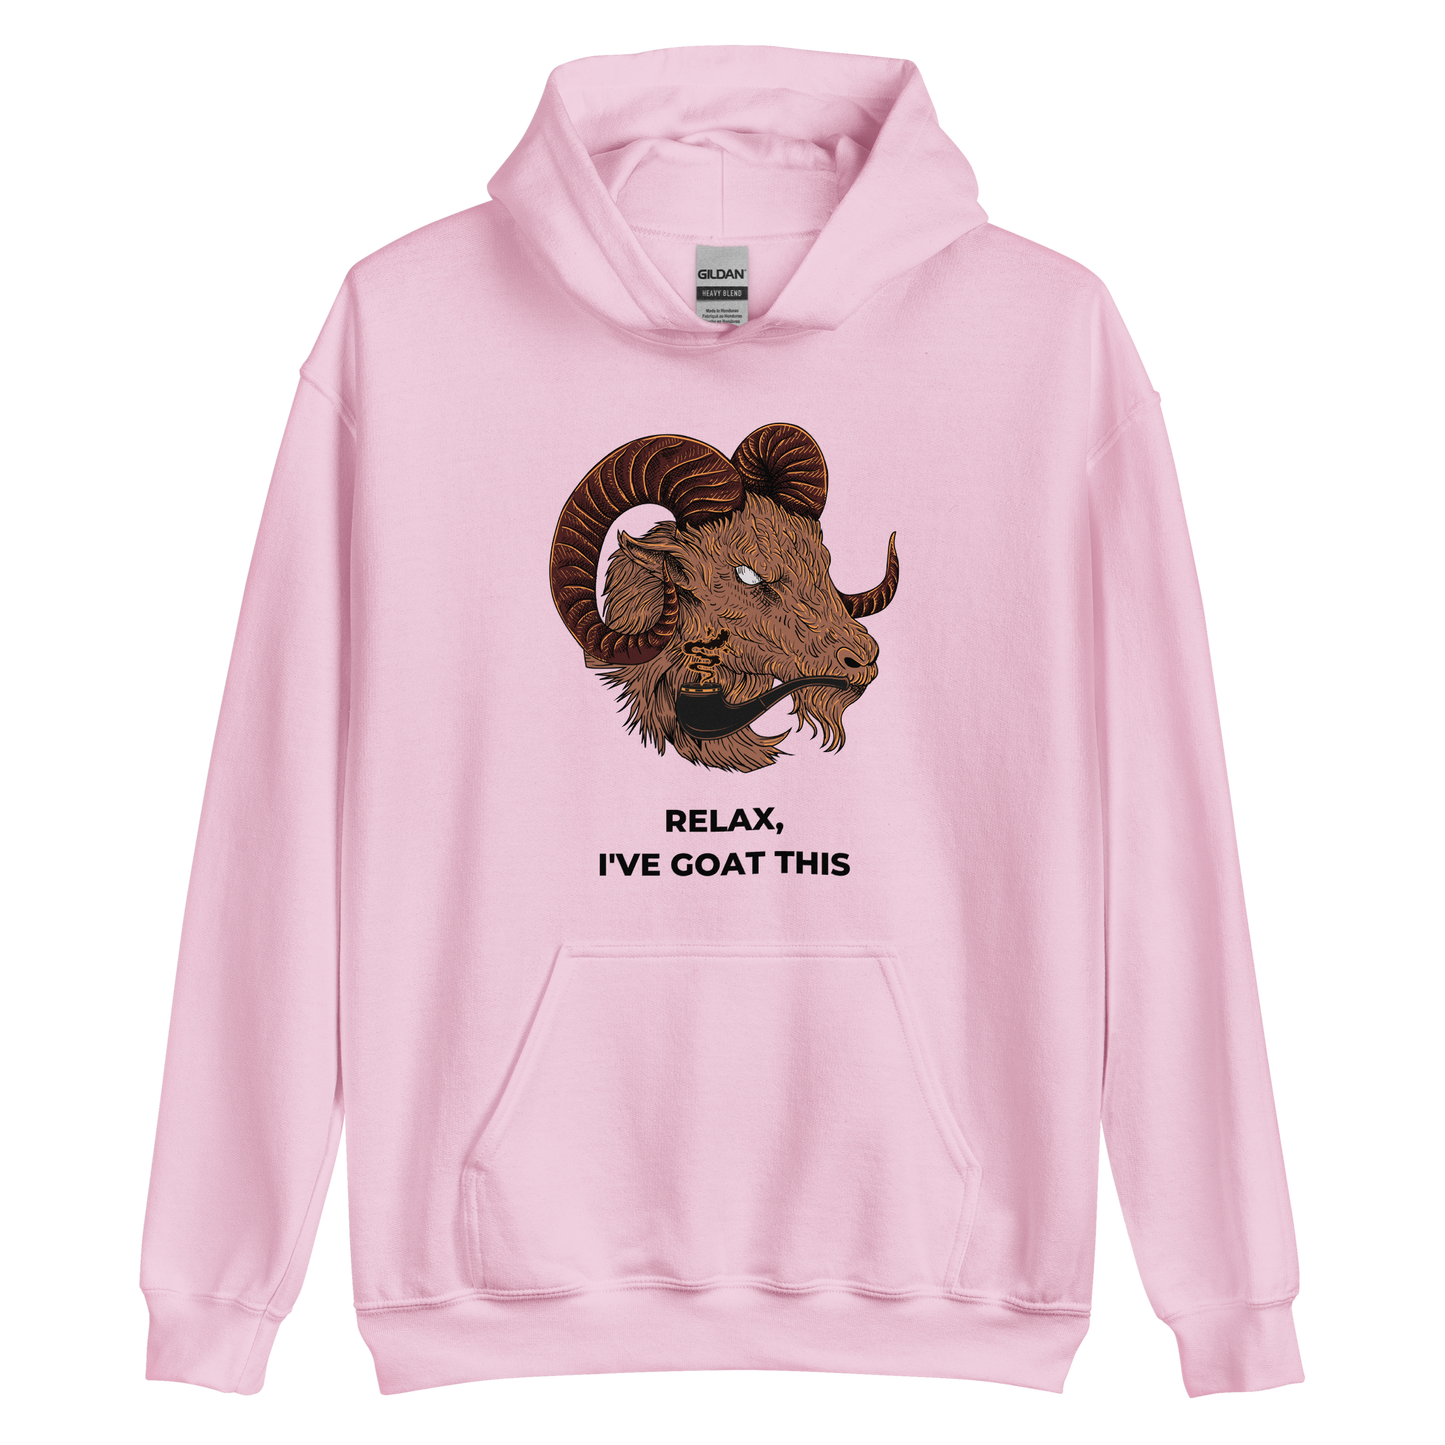 Light Pink Goat Hoodie featuring a captivating Relax, I've Goat This graphic on the chest - Funny Graphic Goat Hoodies - Boozy Fox